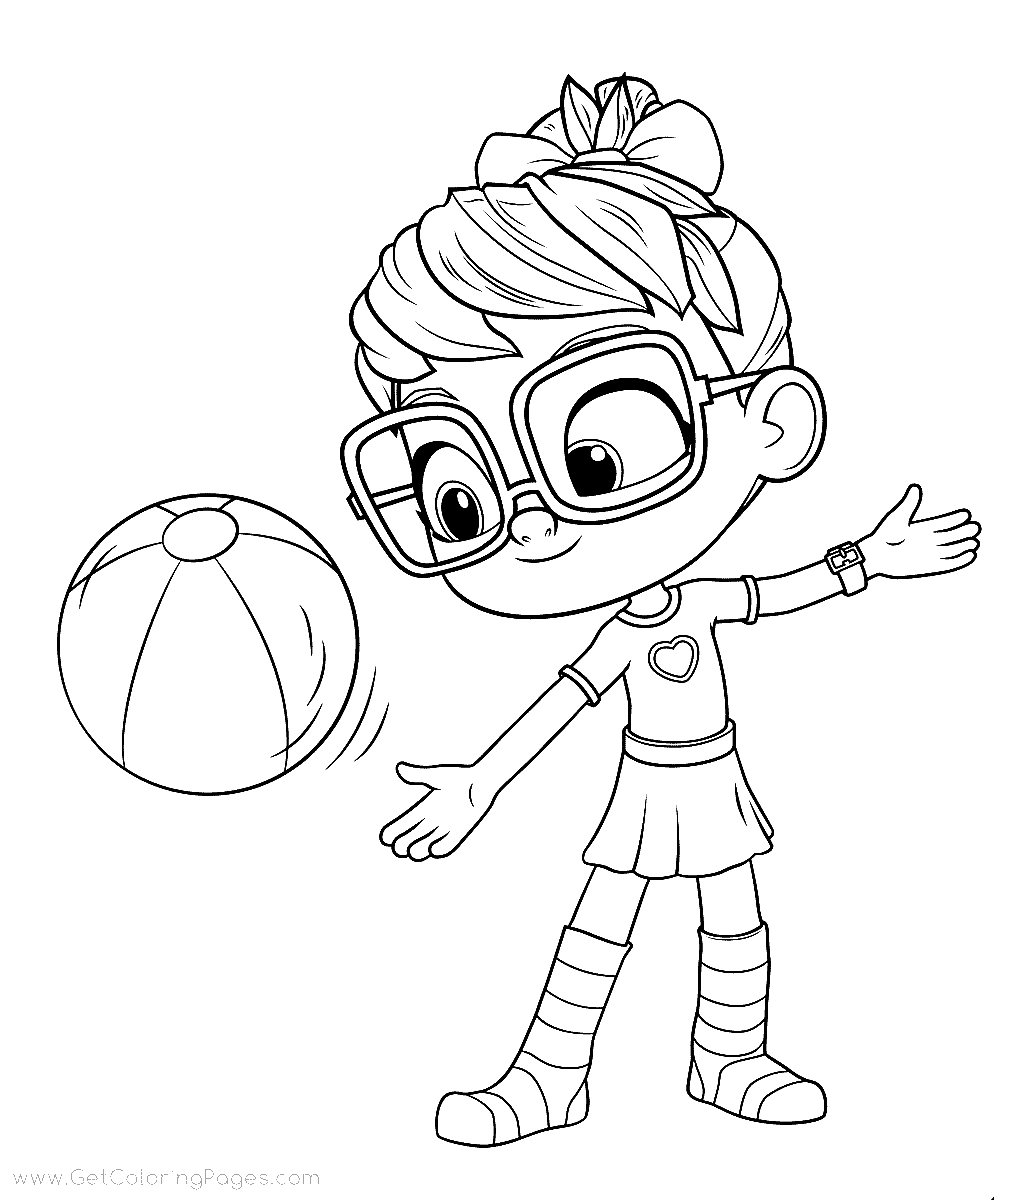 Abby Playing Ball Coloring Page